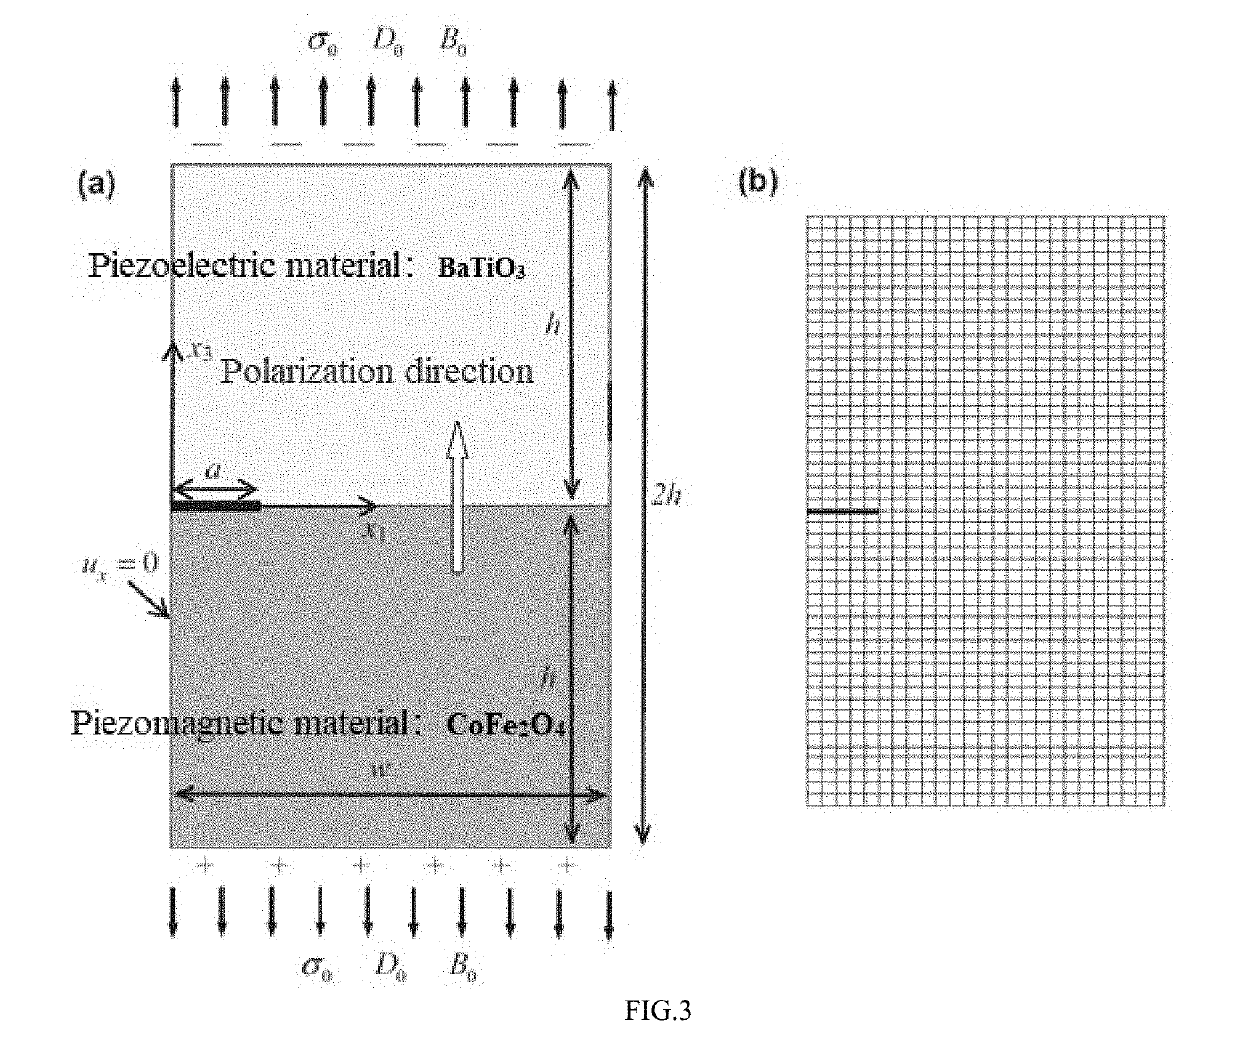 Electromagnetic detector for detection of interface cracks in a piezoelectric - piezomagnetic laminated structure